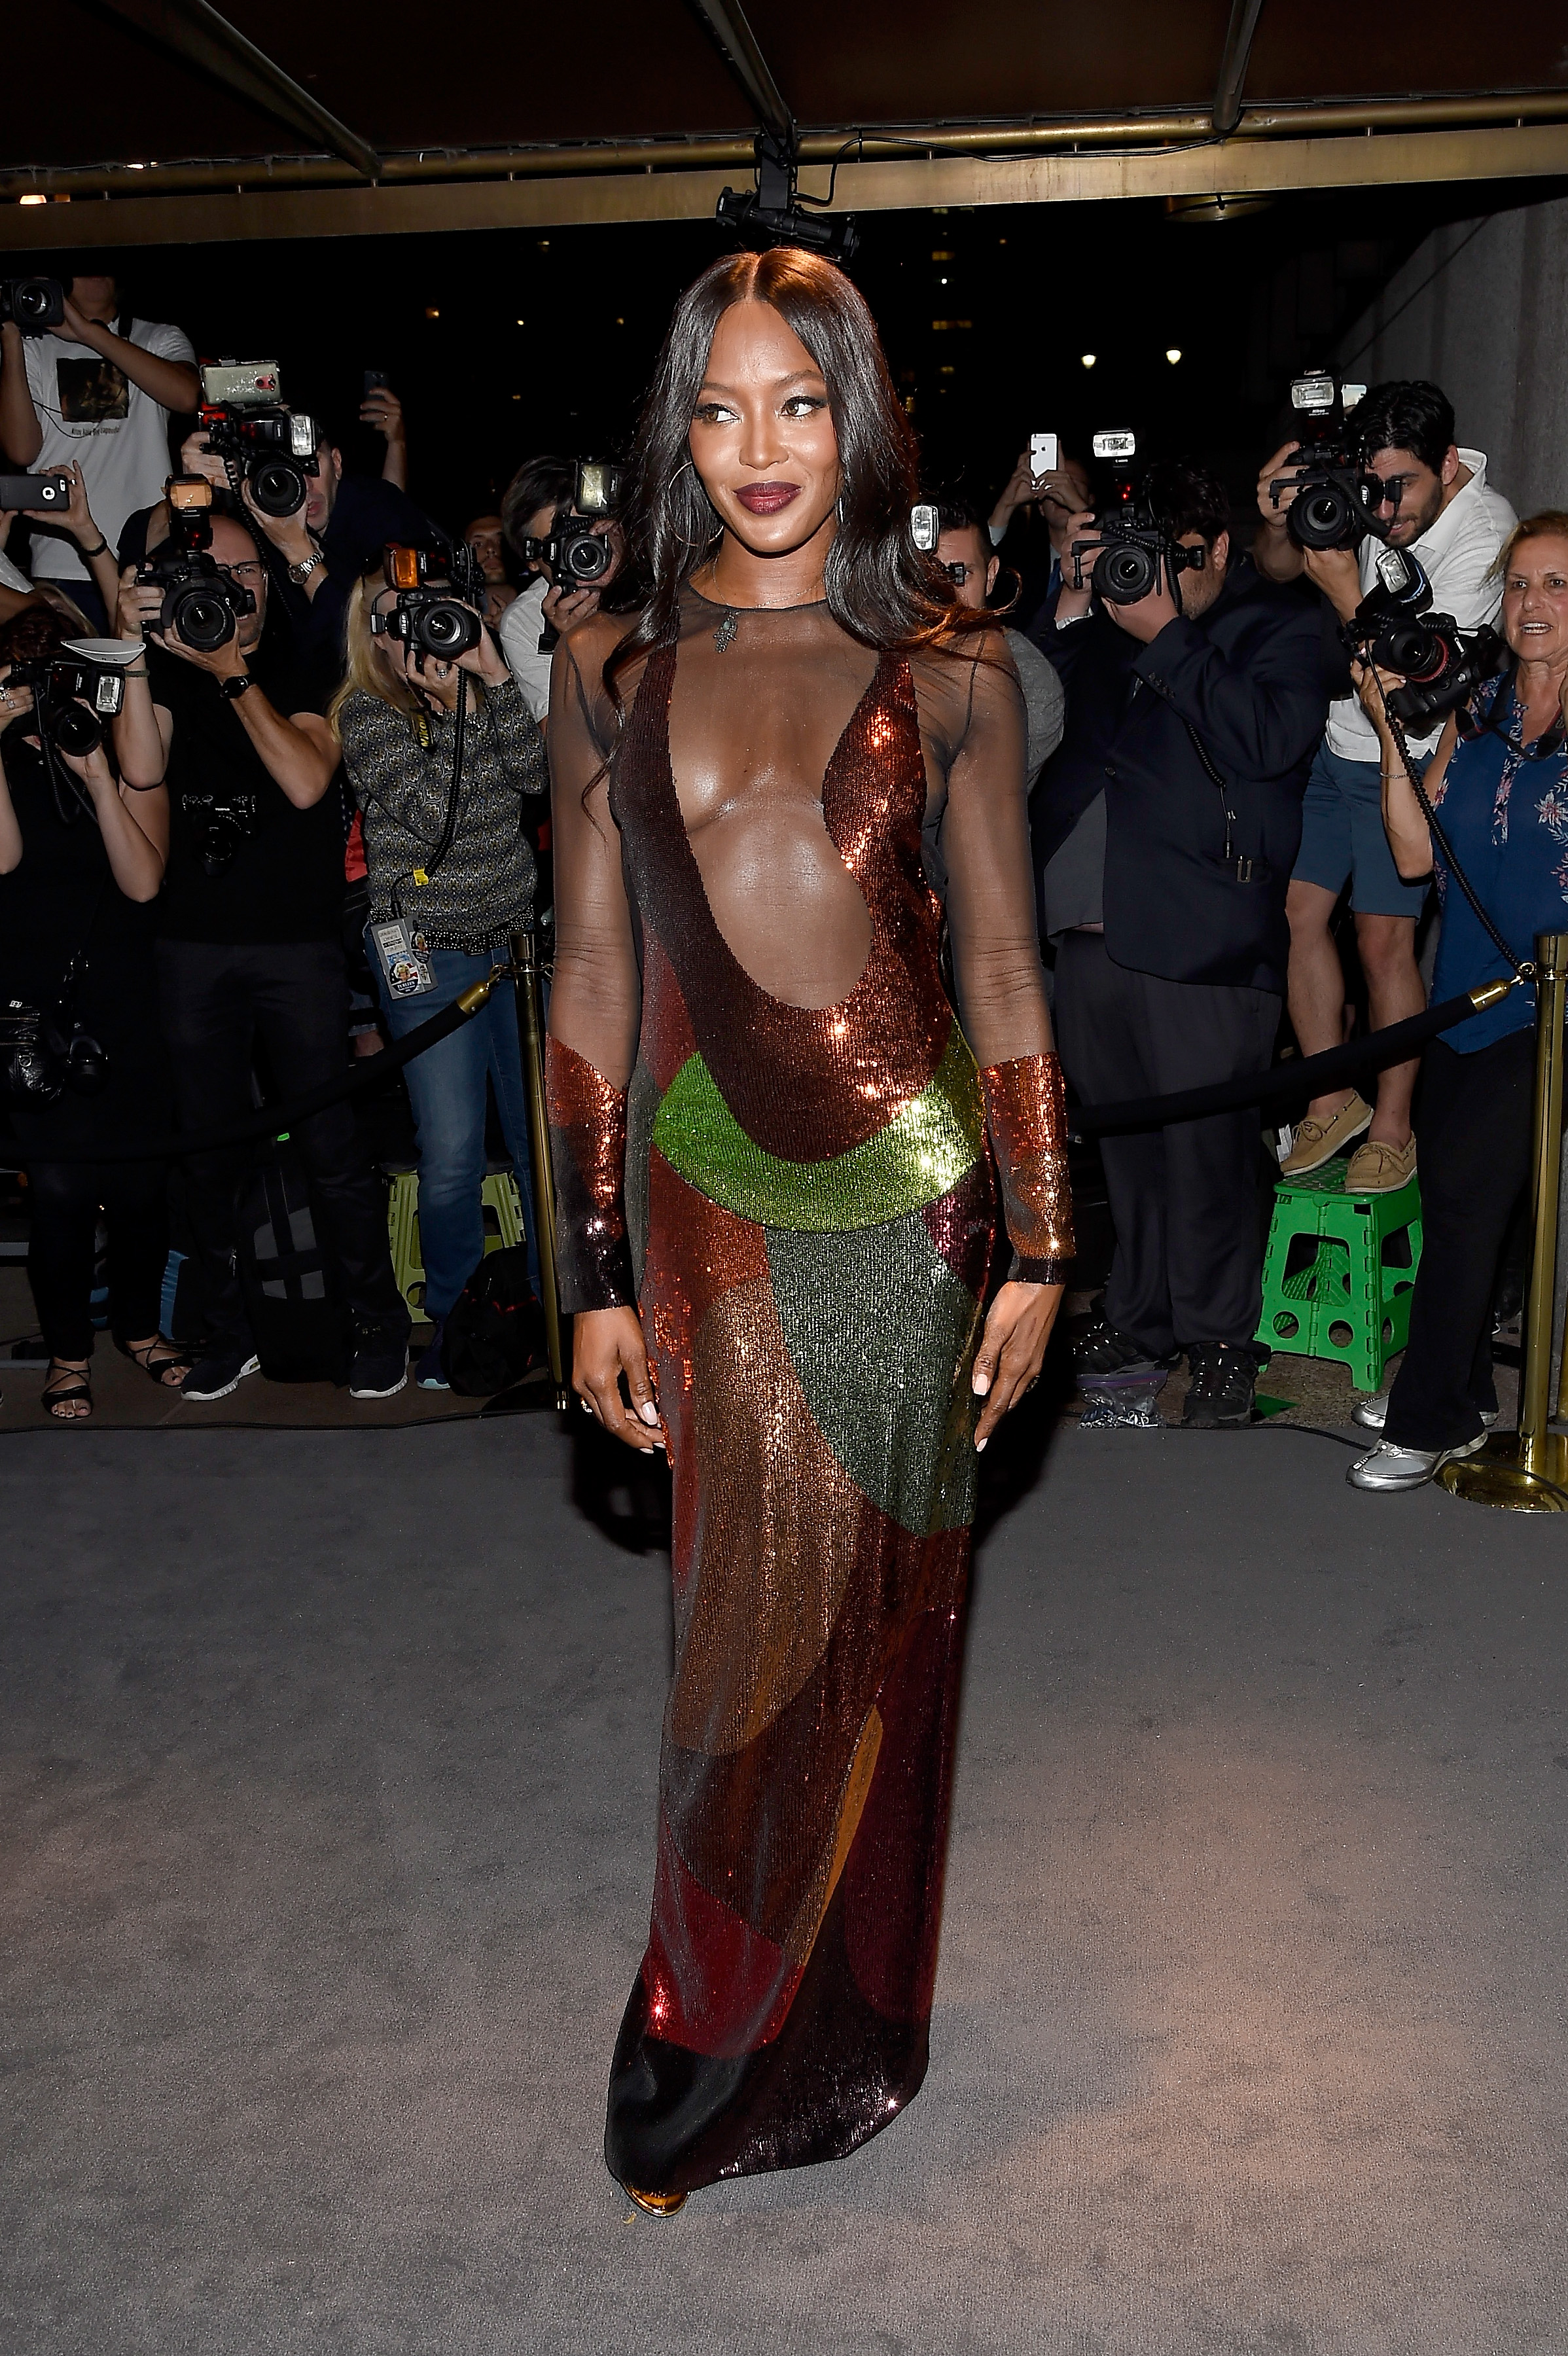 Naomi Campbell attends Tom Ford fashion show during New York Fashion Week. Photo by Frazer Harrison/Getty Images